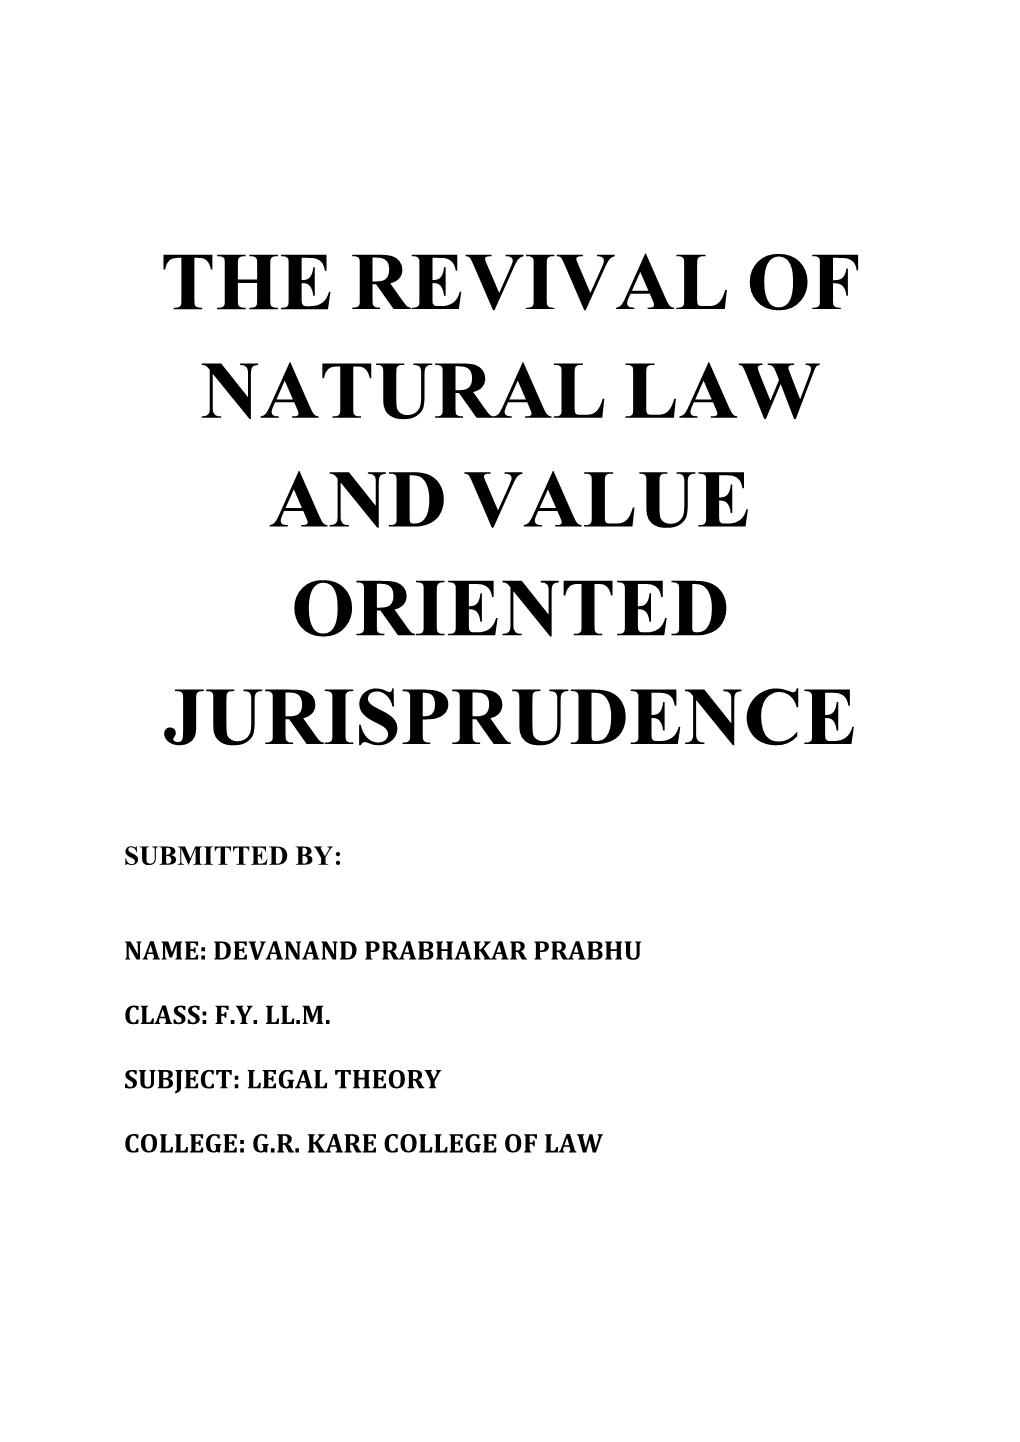 The Revival of Natural Law and Value Oriented Jurisprudence